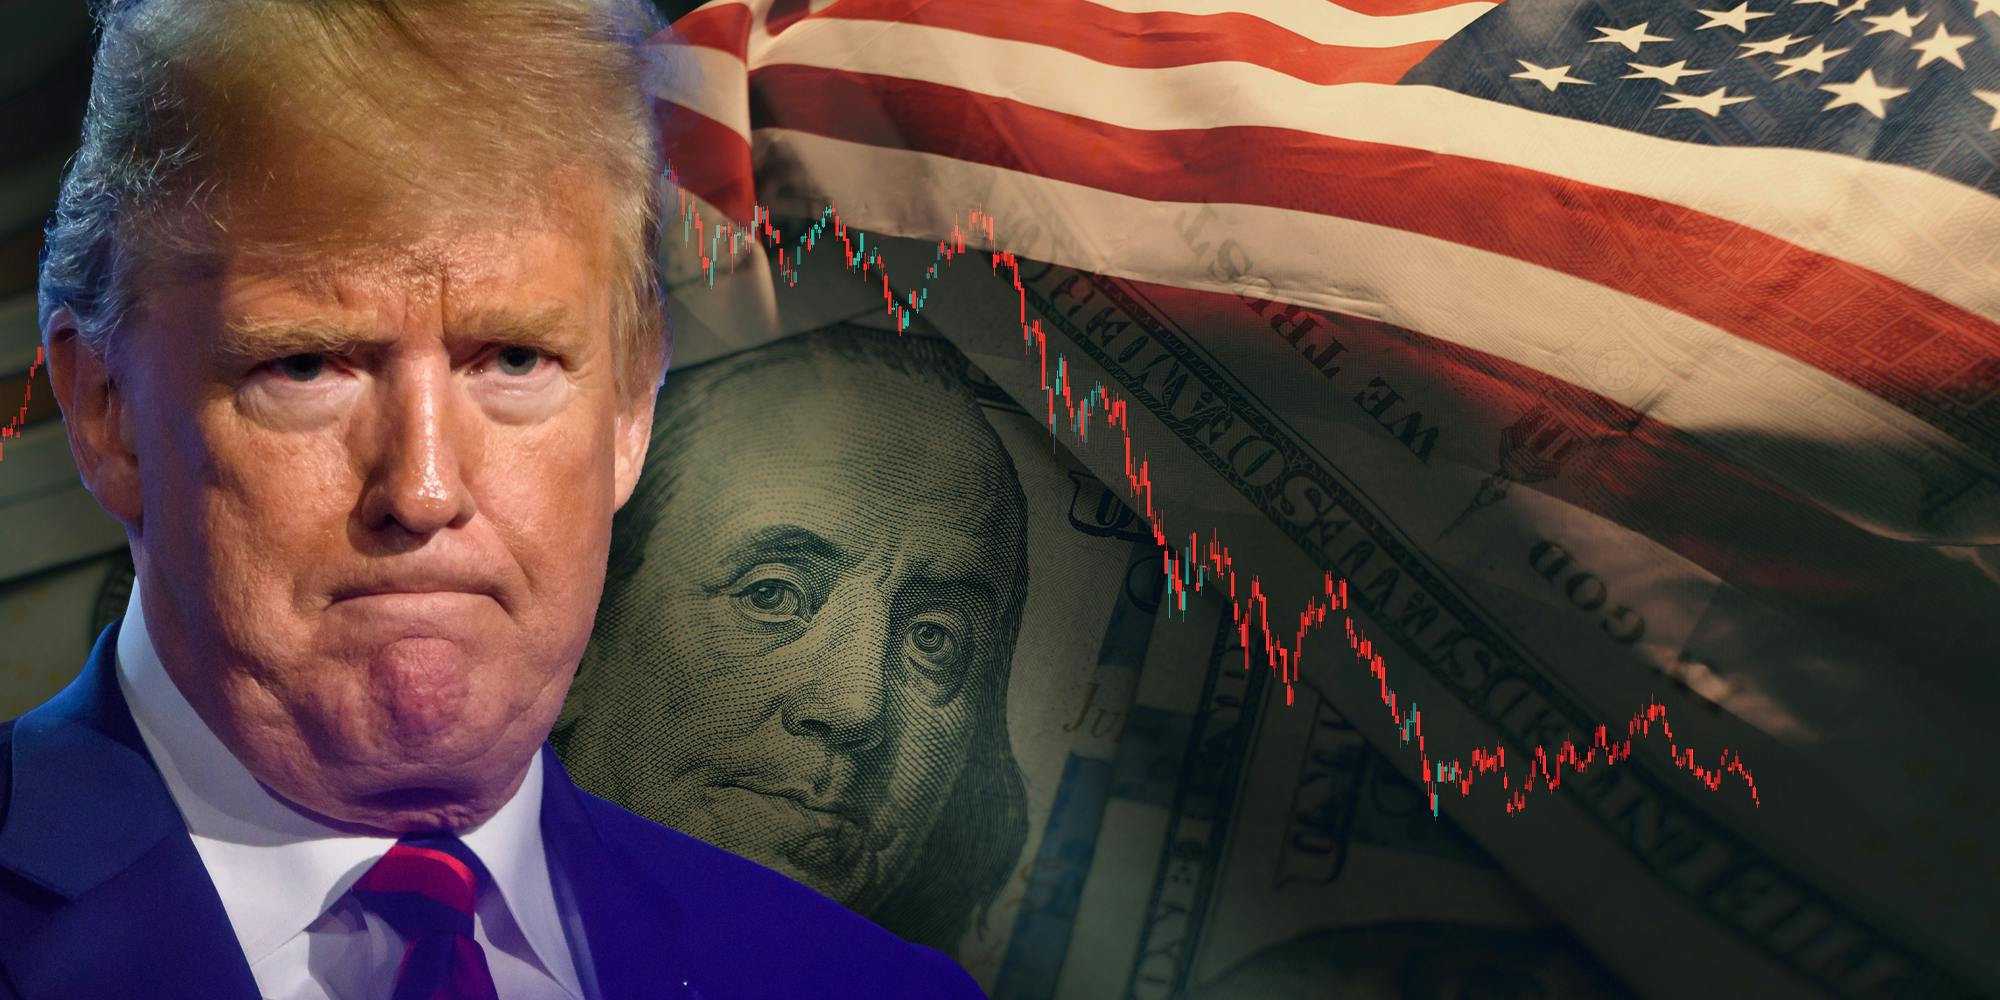 As Trump Media stock tumbles, "patriots" are buying the dip